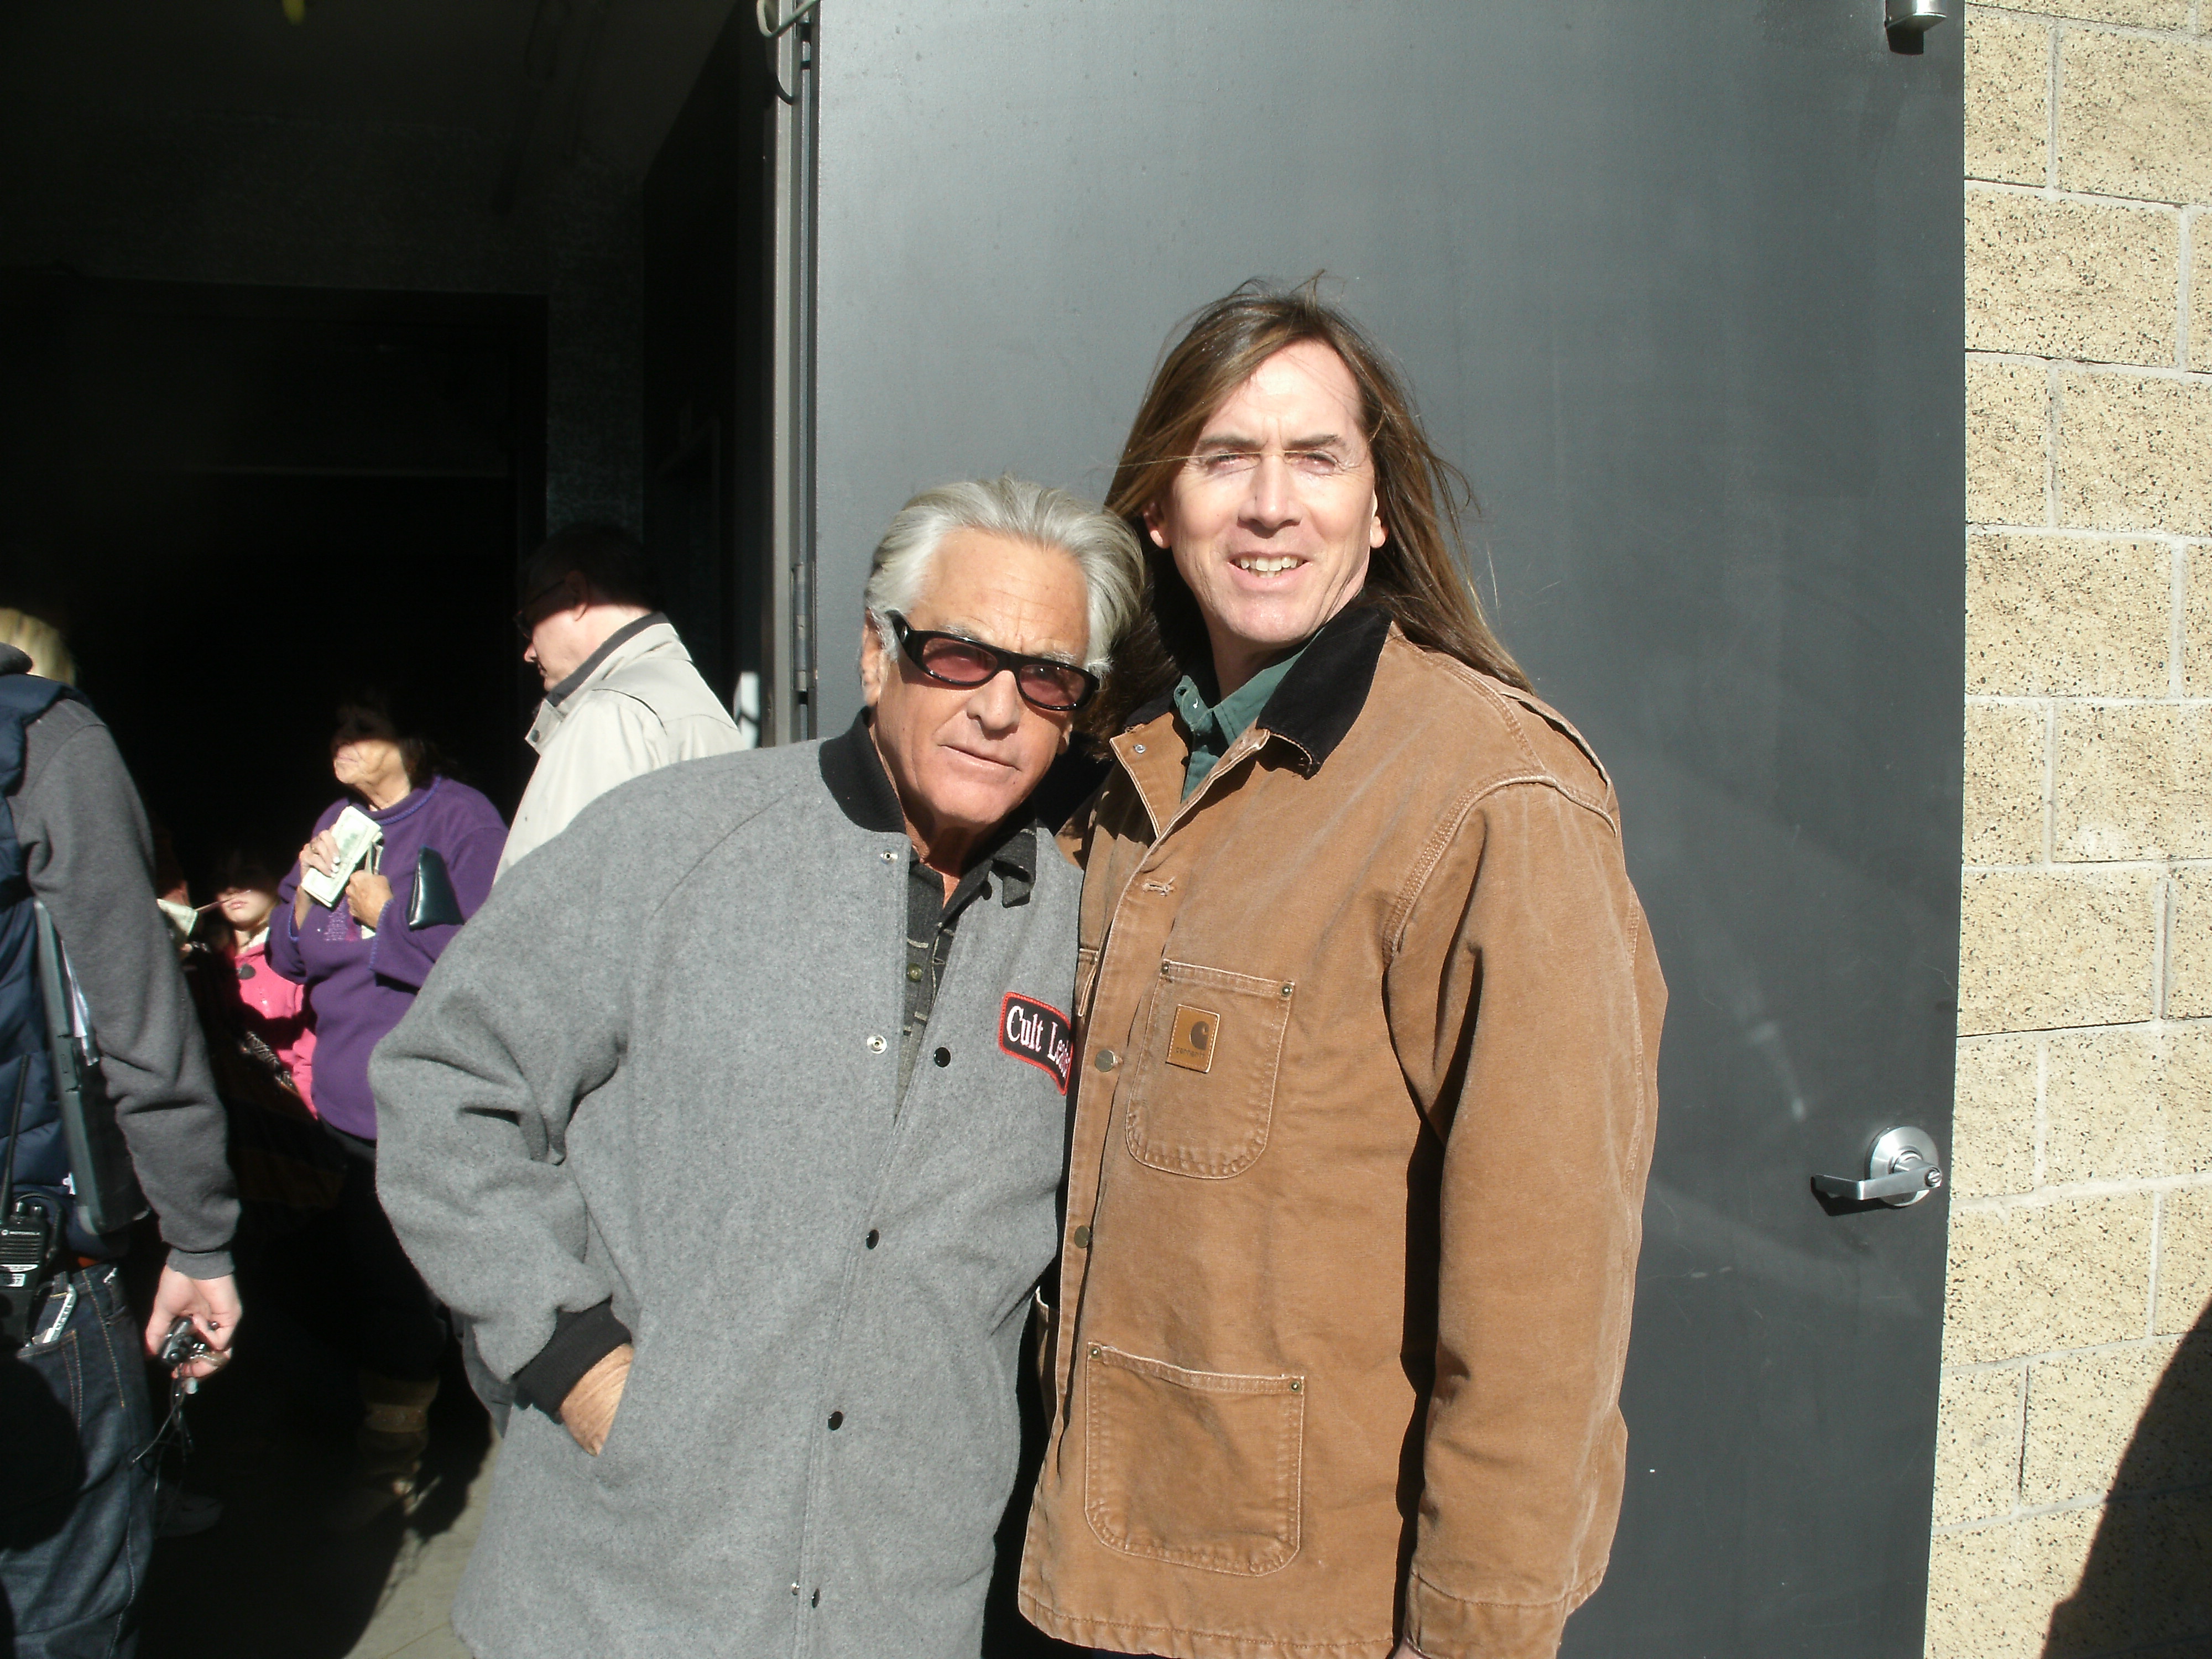 With Barry Weiss filming an episode of 